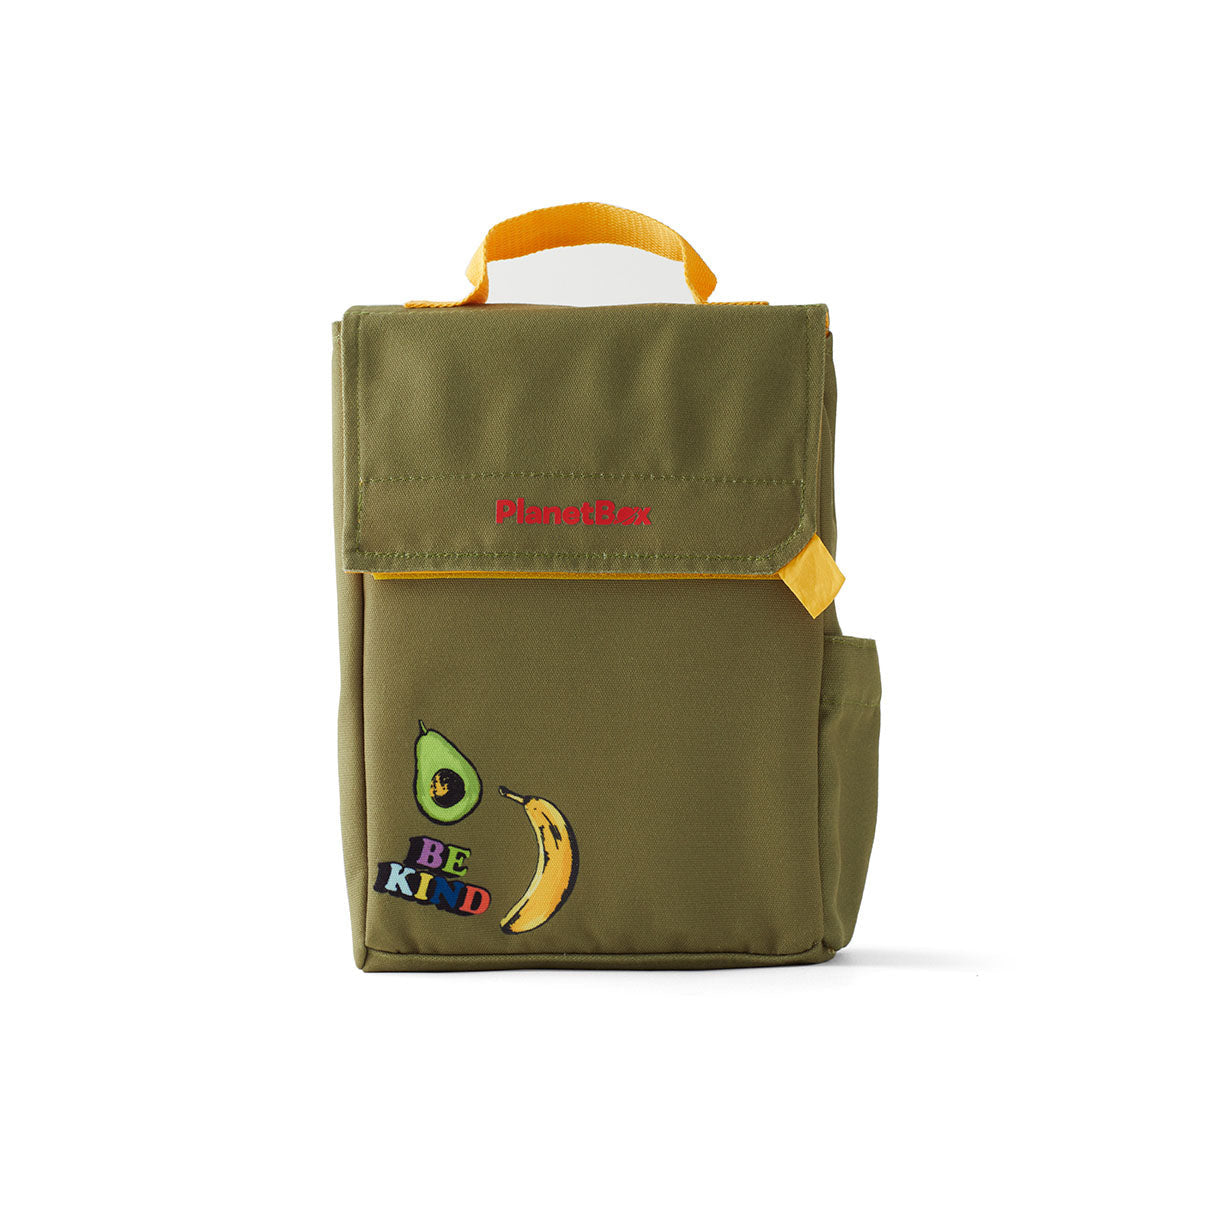 https://cdn.shopify.com/s/files/1/0523/9145/files/planetbox-lunch-sack-peat-moss-be-kind-lunch-bag-planetbox-cute-kid-stuff-0_1600x.jpg?v=1682551312